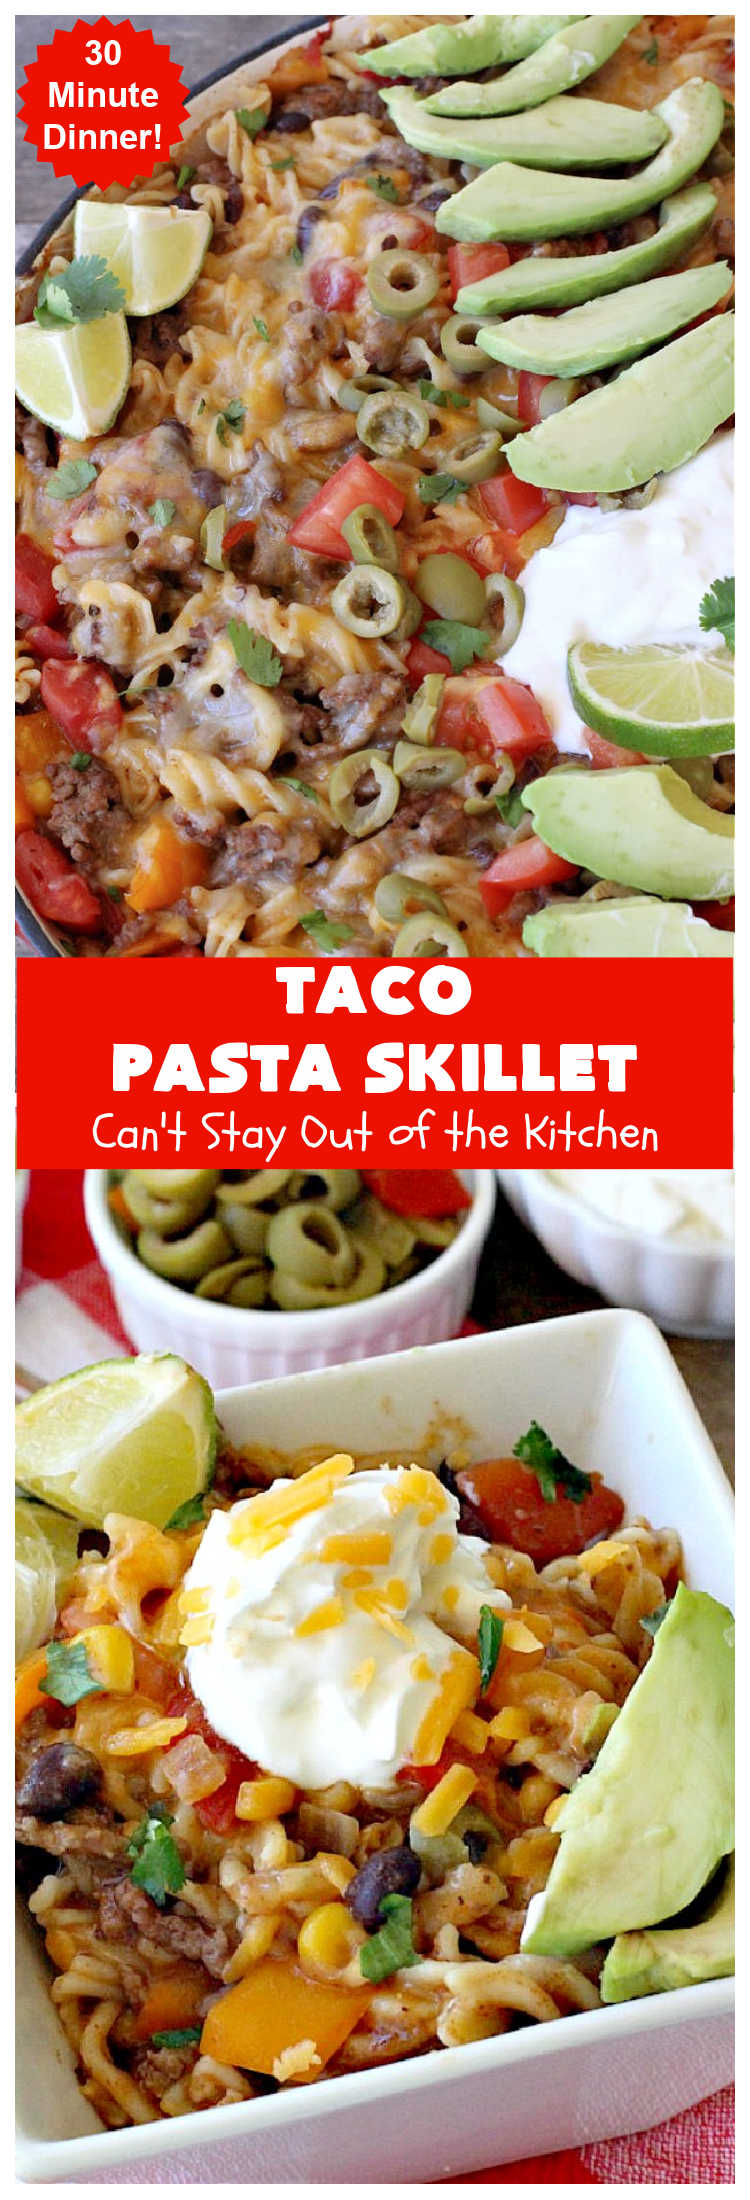 30-Minute Taco Pasta Skillet | Can't Stay Out of the Kitchen | This delicious #TexMex #beef entree includes #GlutenFree #pasta, #beans & corn and can be made in about 30 minutes. The toppings make this dish fabulous. It's great for weeknight dinners! #avocados #tomatoes #olives #cheese #TacoPastaSkillet #30MinuteMeal